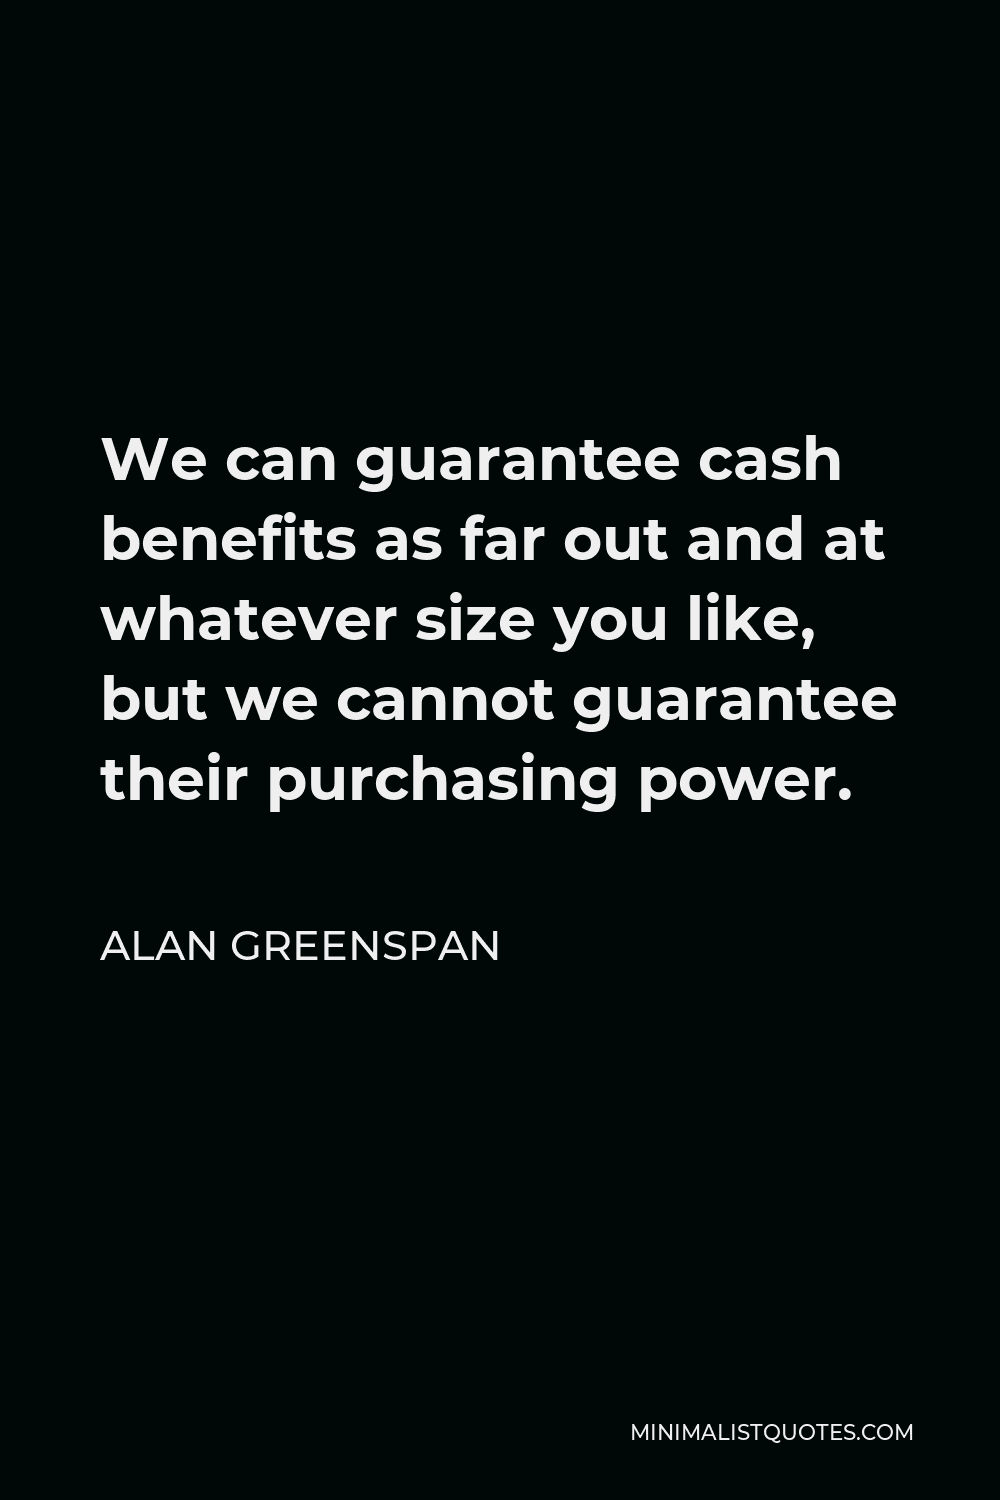 Alan Greenspan Quote - We can guarantee cash benefits as far out and at whatever size you like, but we cannot guarantee their purchasing power.